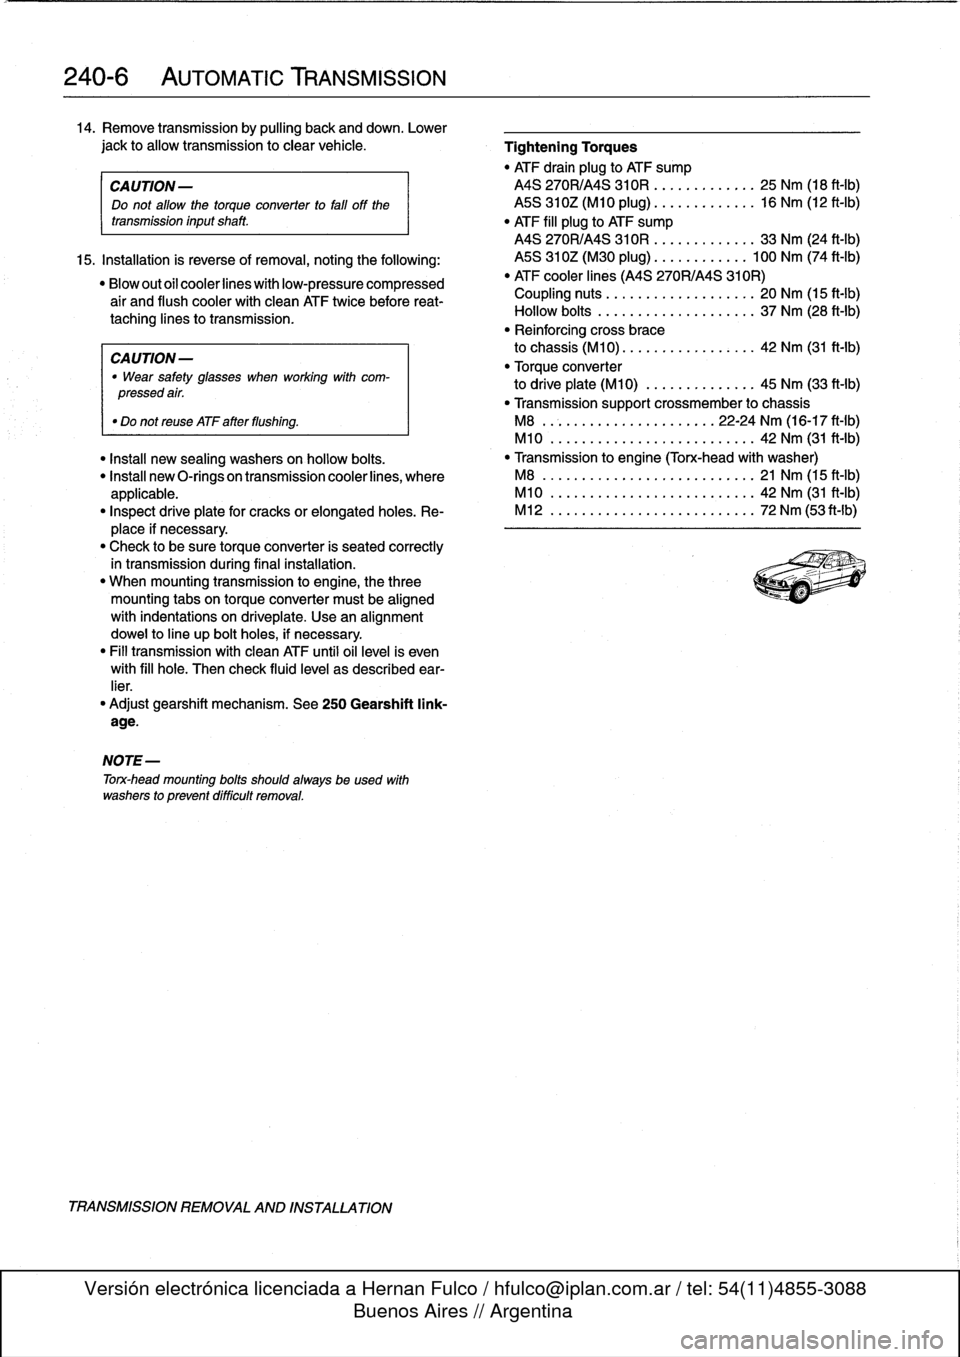 BMW 325i 1992 E36 Workshop Manual 
240-
6

	

AUTOMATIC
TRANSMISSION

14
.
Remove
transmission
by
pulling
back
and
down
.
Lower

jack
to
allow
transmission
to
clear
vehicle
.

	

Tightening
Torques

"
ATF
drain
plug
to
ATF
sump

CA
UT